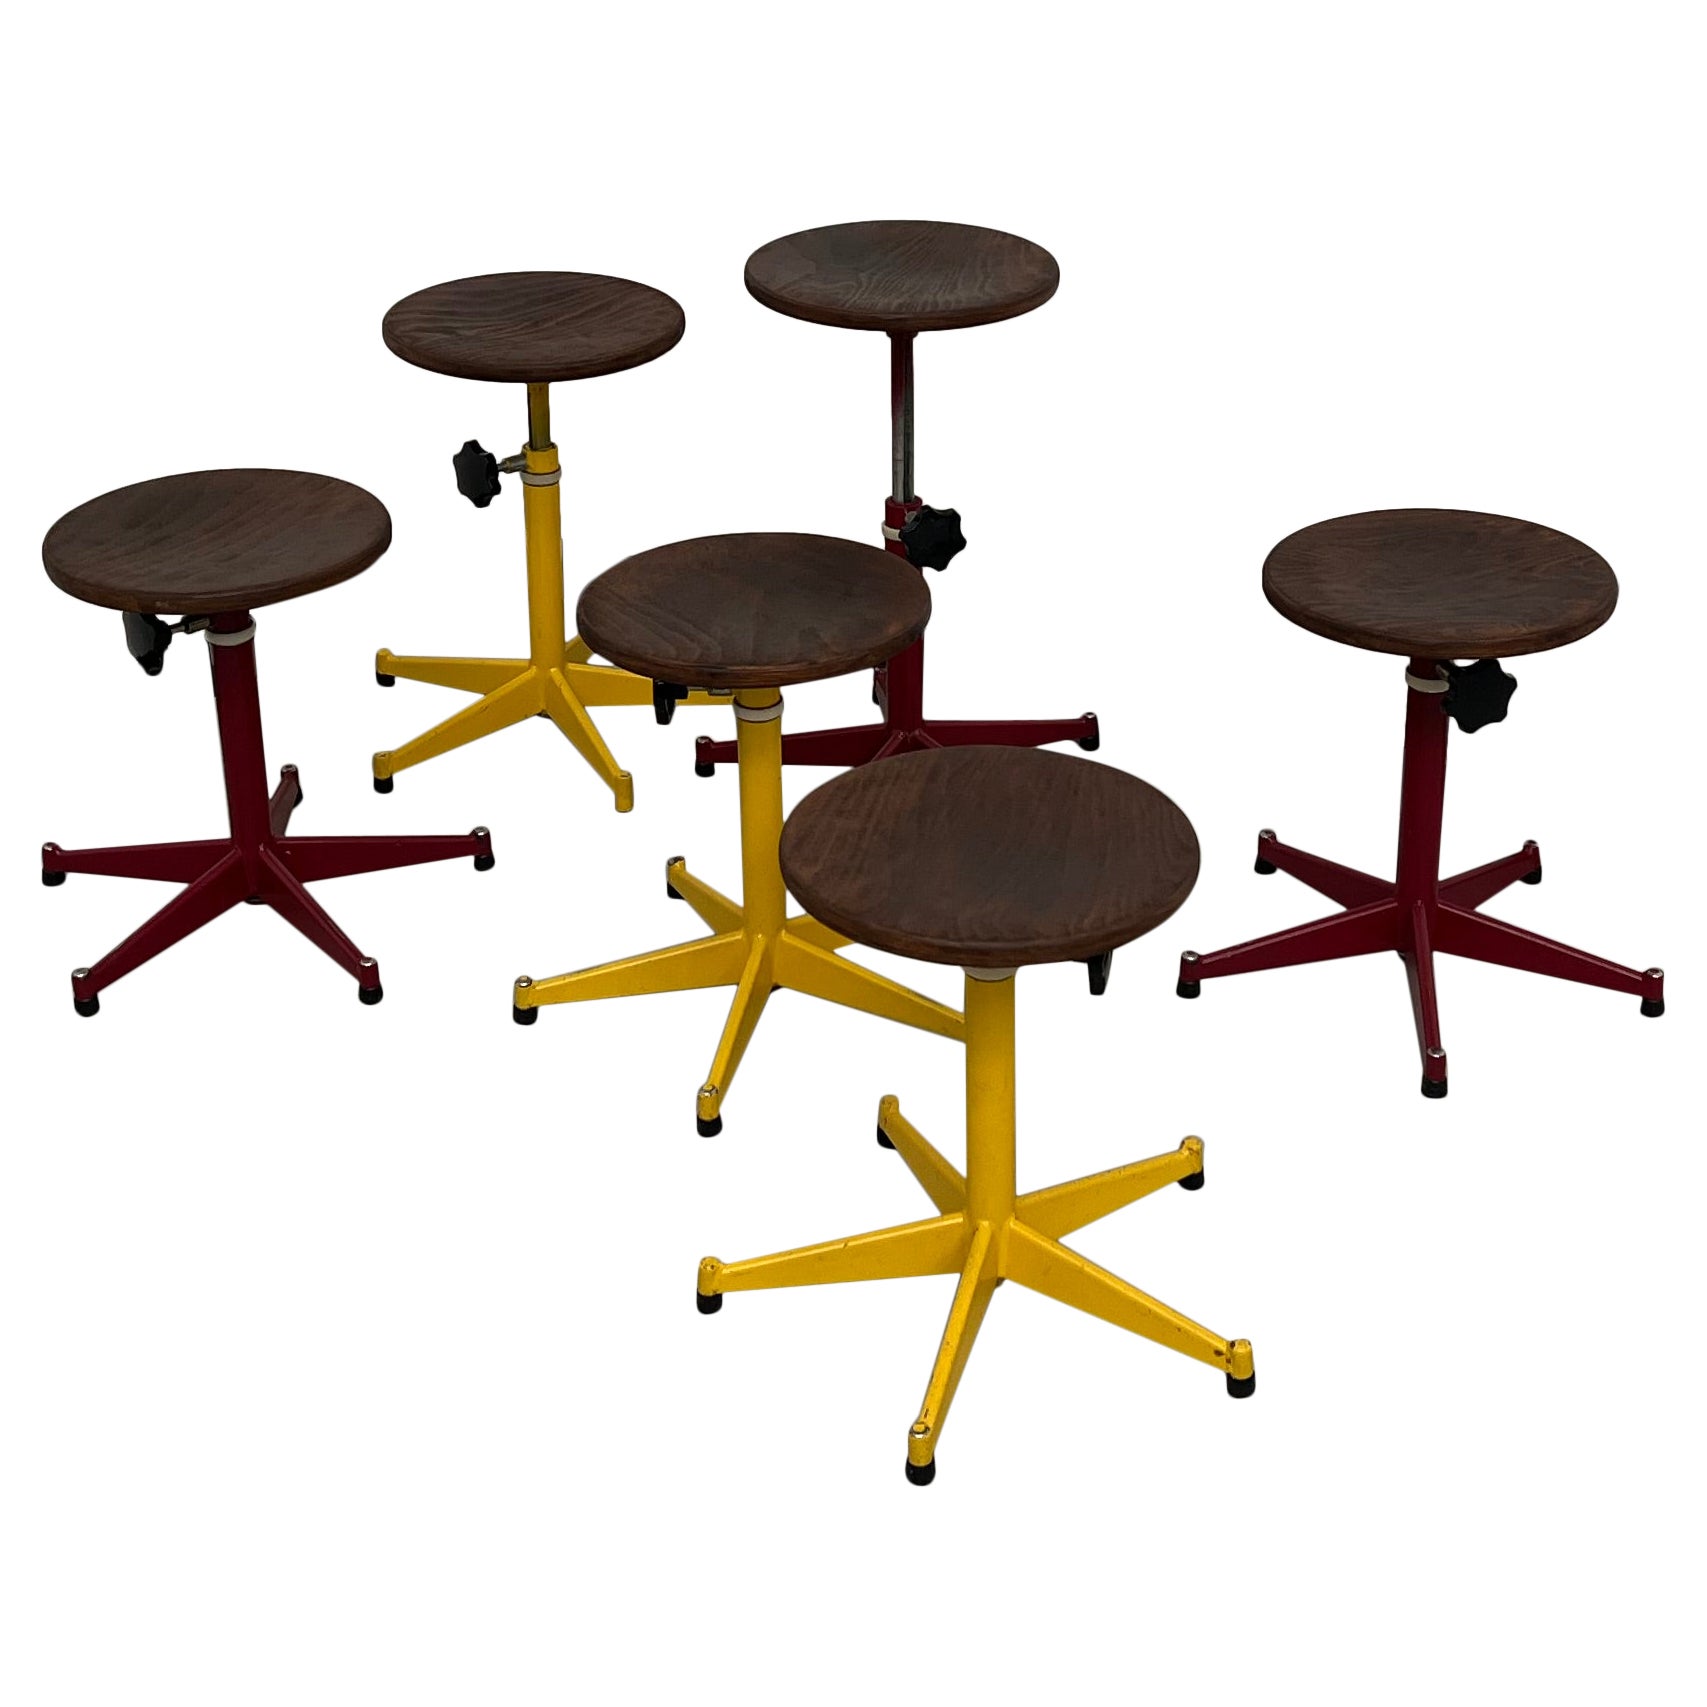 6 vintage stools from a french school, 50's